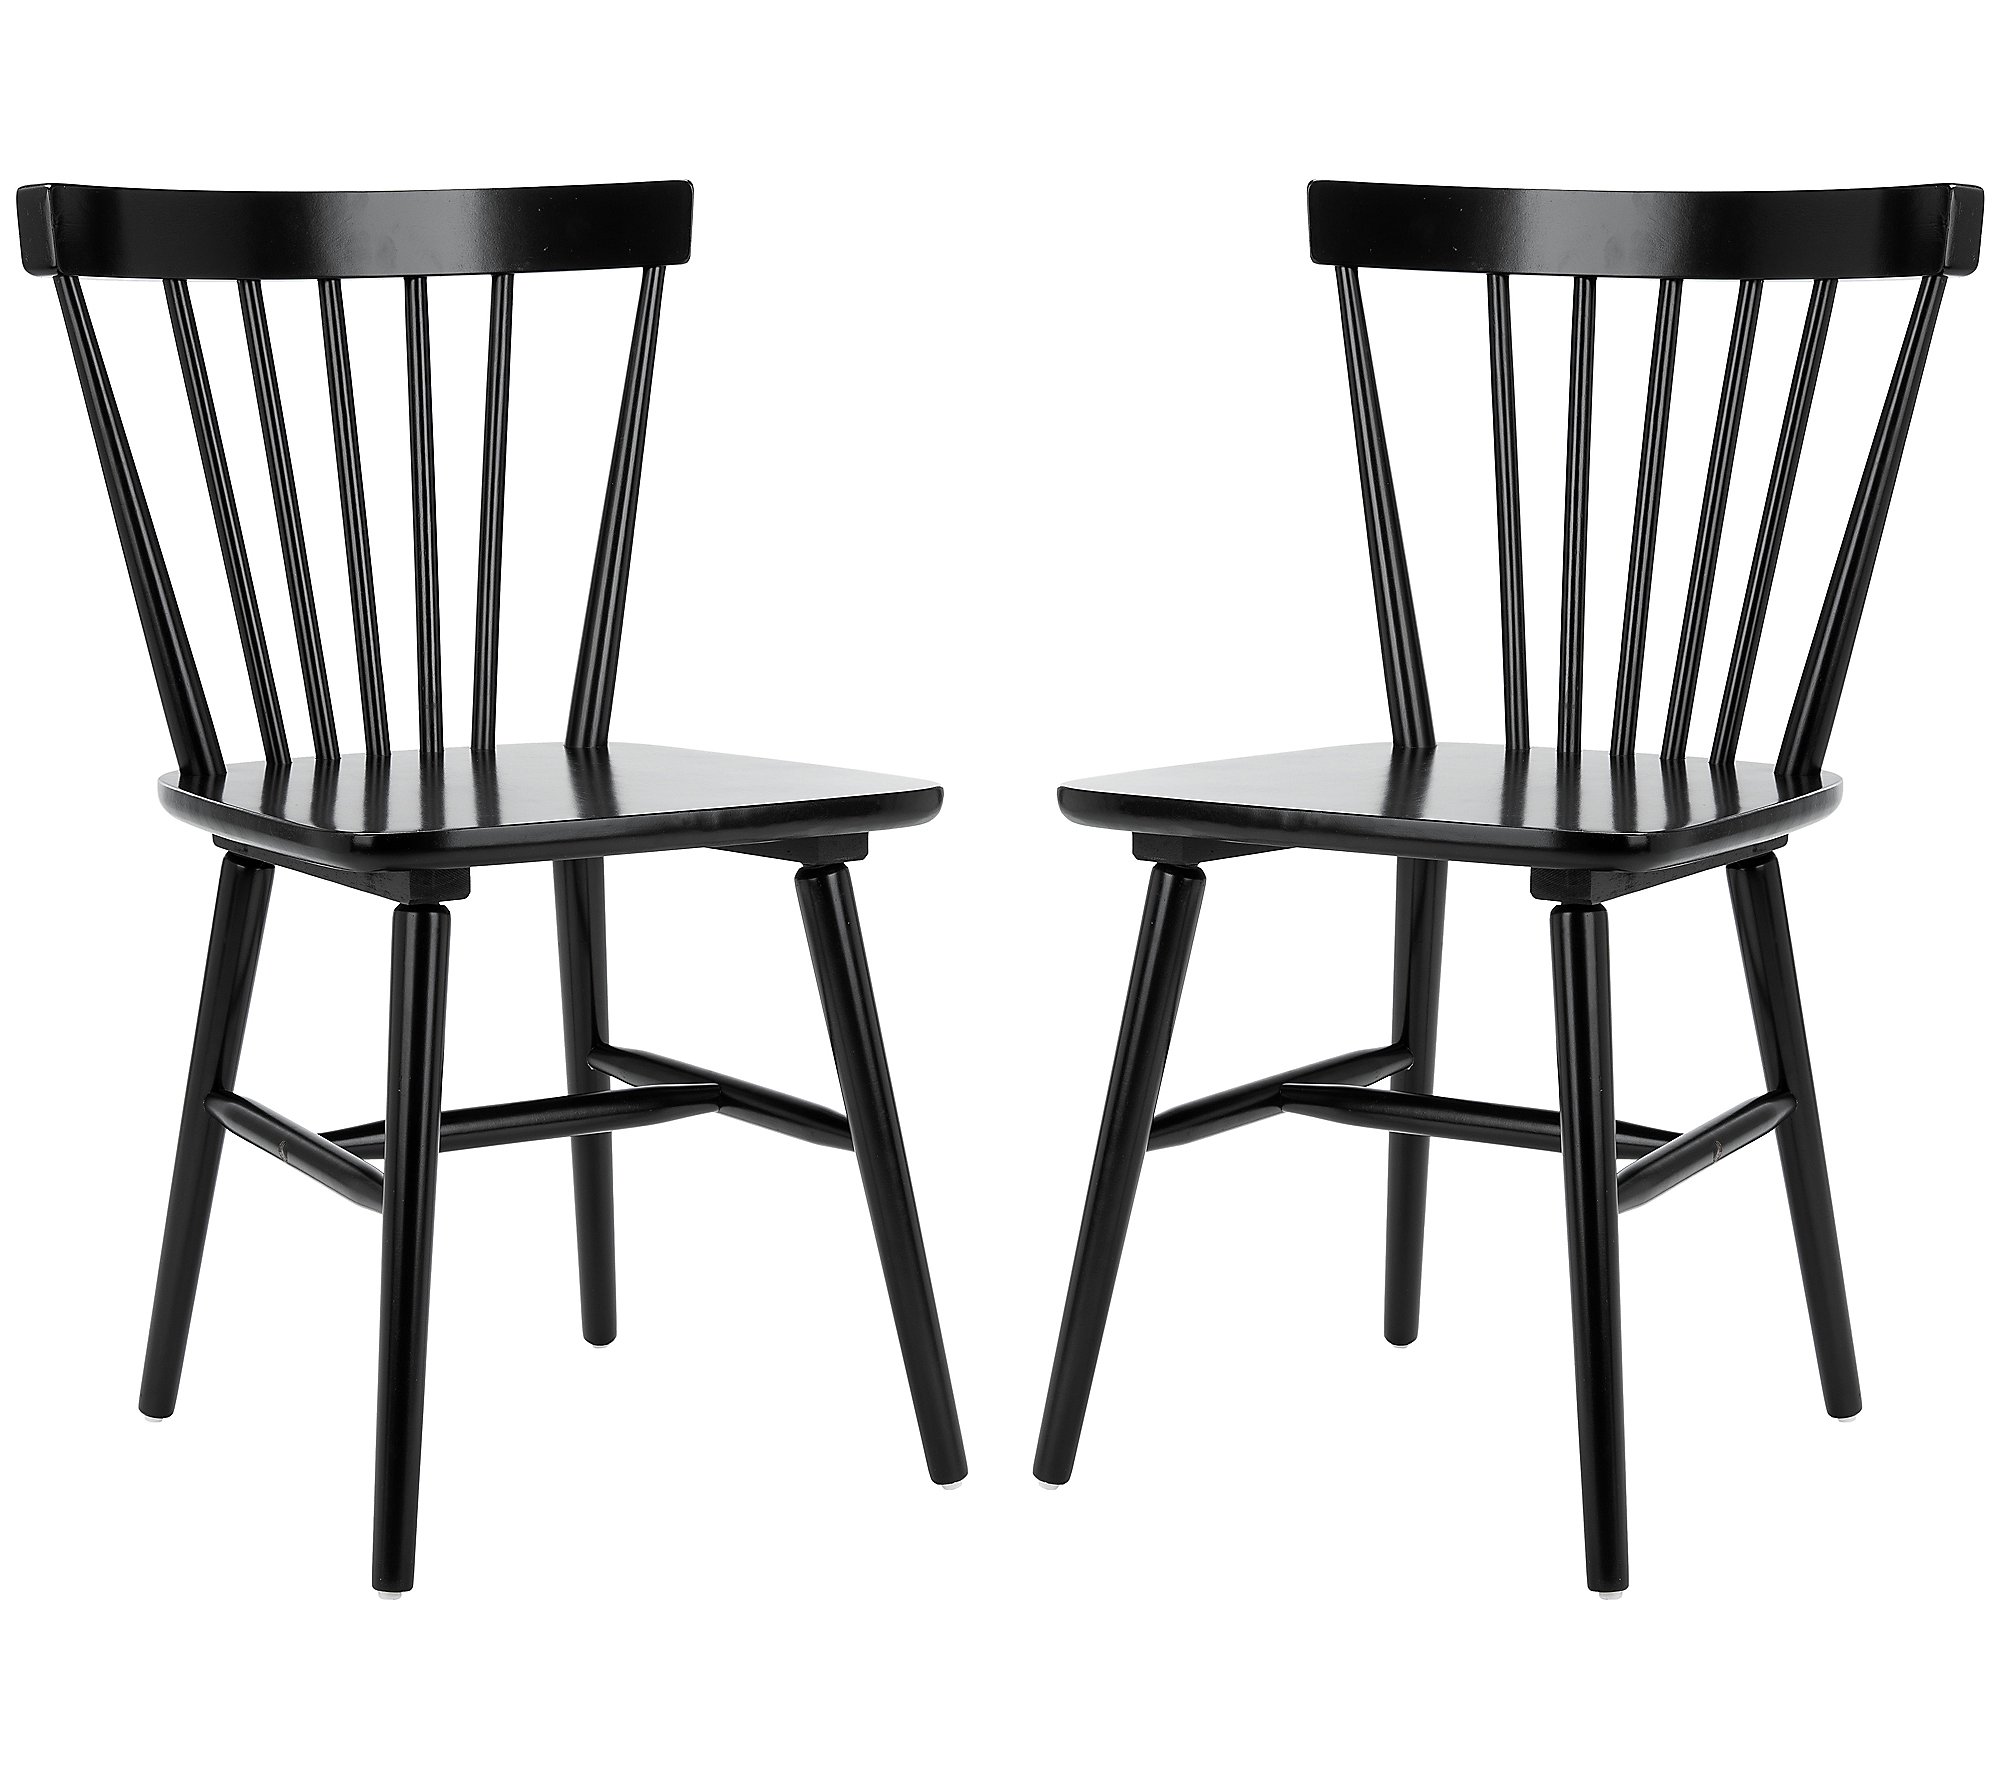 Safavieh Winona Spindle Dining Chair (Set of 2)